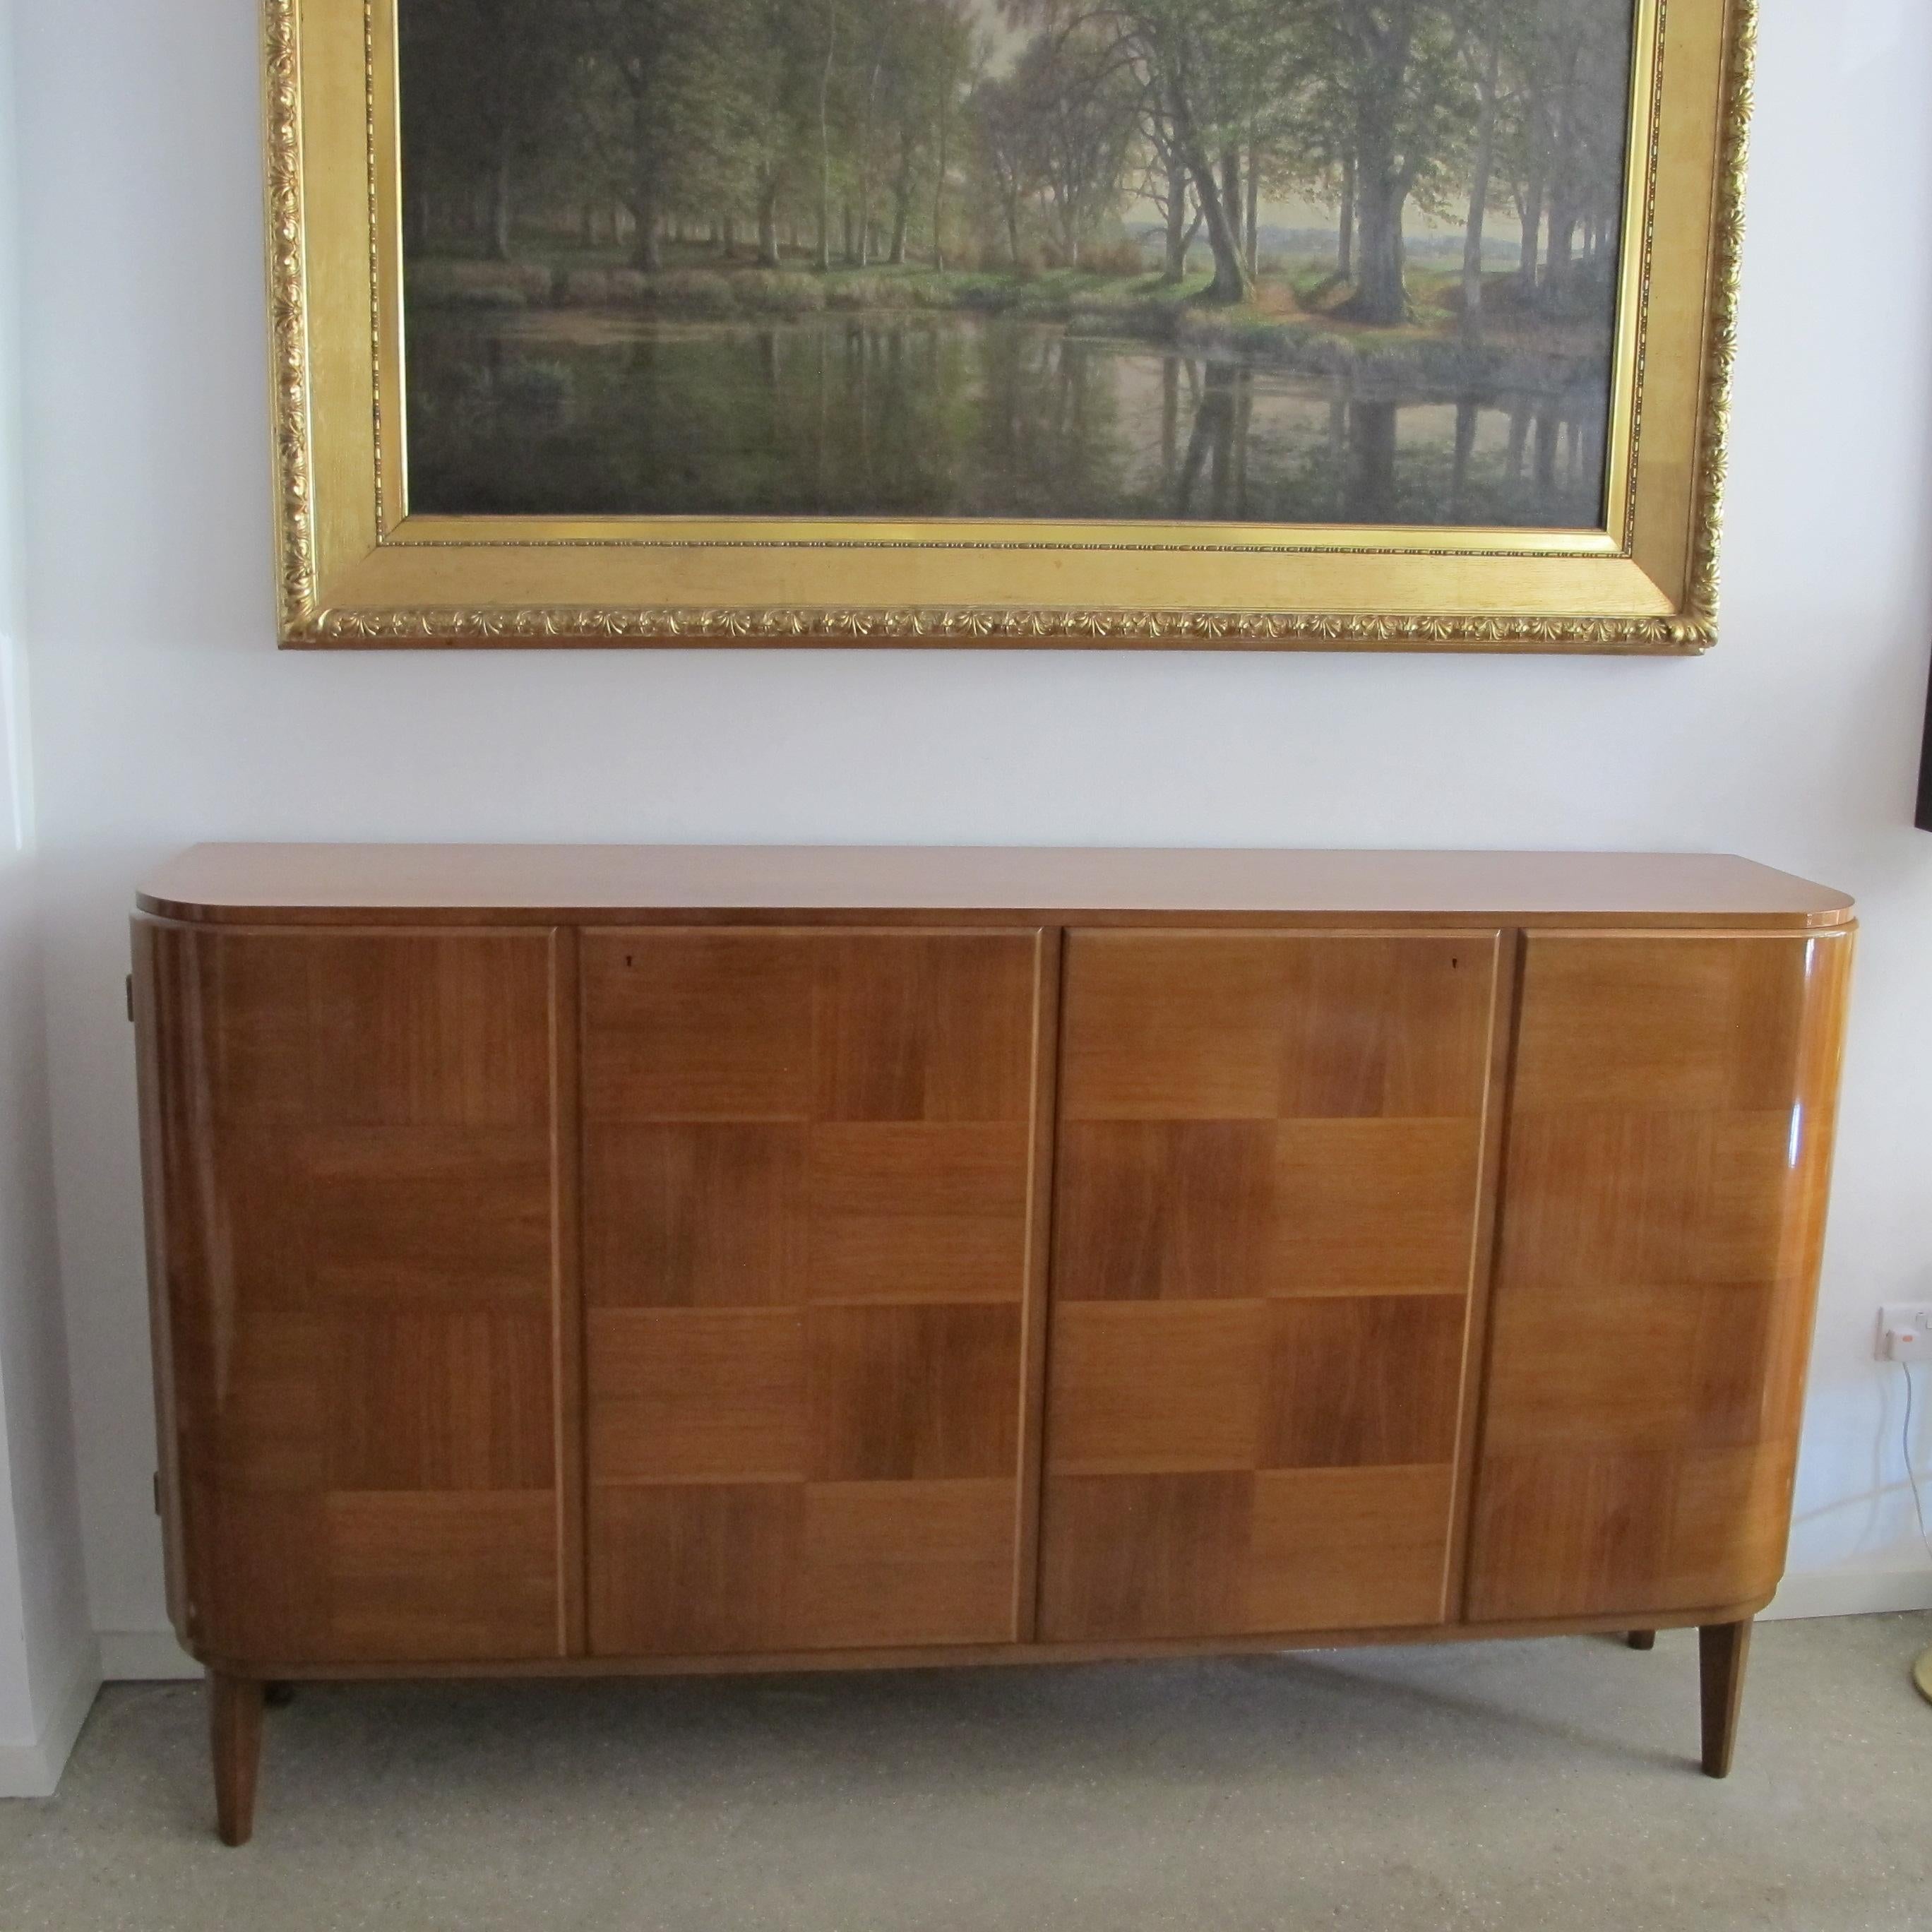 1930s/40s Art Deco Rare Sideboard with Curved edges by Carl Axel Acking  2